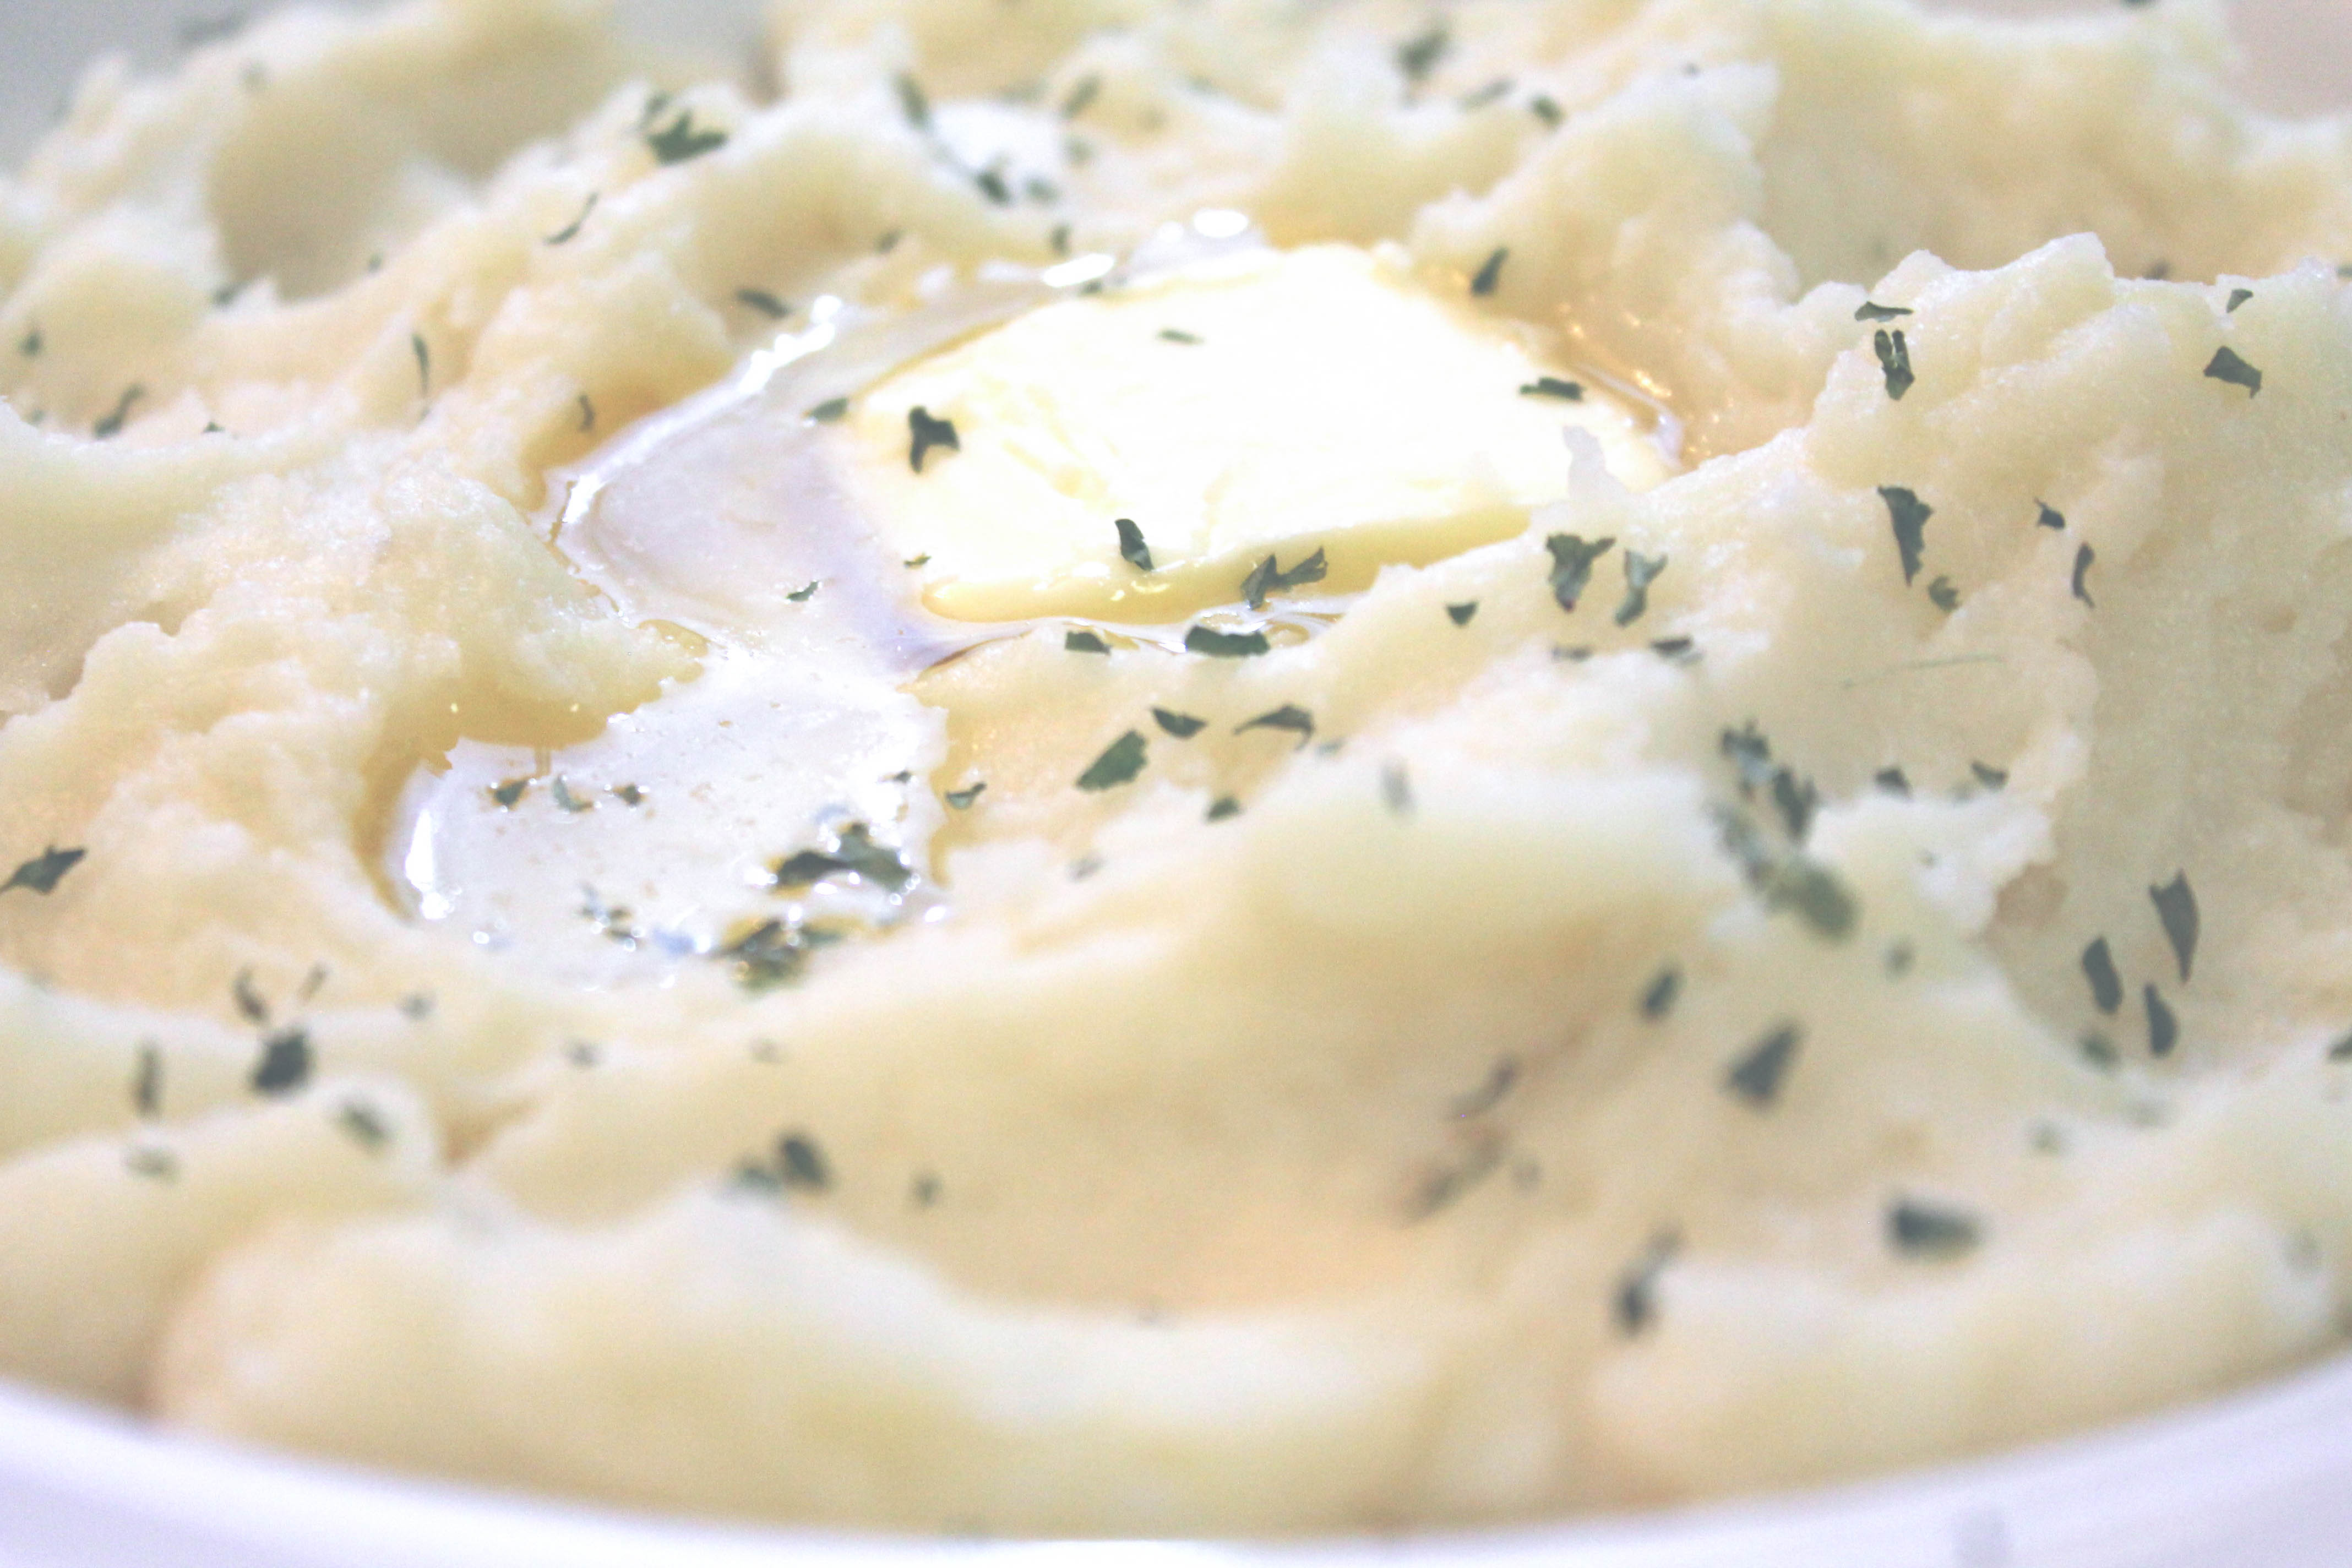 These creamy mashed potatoes go with absolutely everything from chicken to steak, turkey... you name it